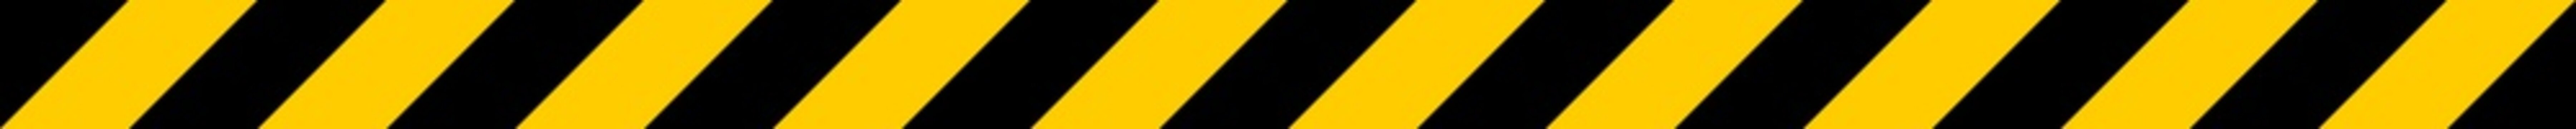 Black and Yellow Security Tape Floor Marking Icon with Diagonal Stripes and an Aspect Ratio of 20:1. Vector Image.